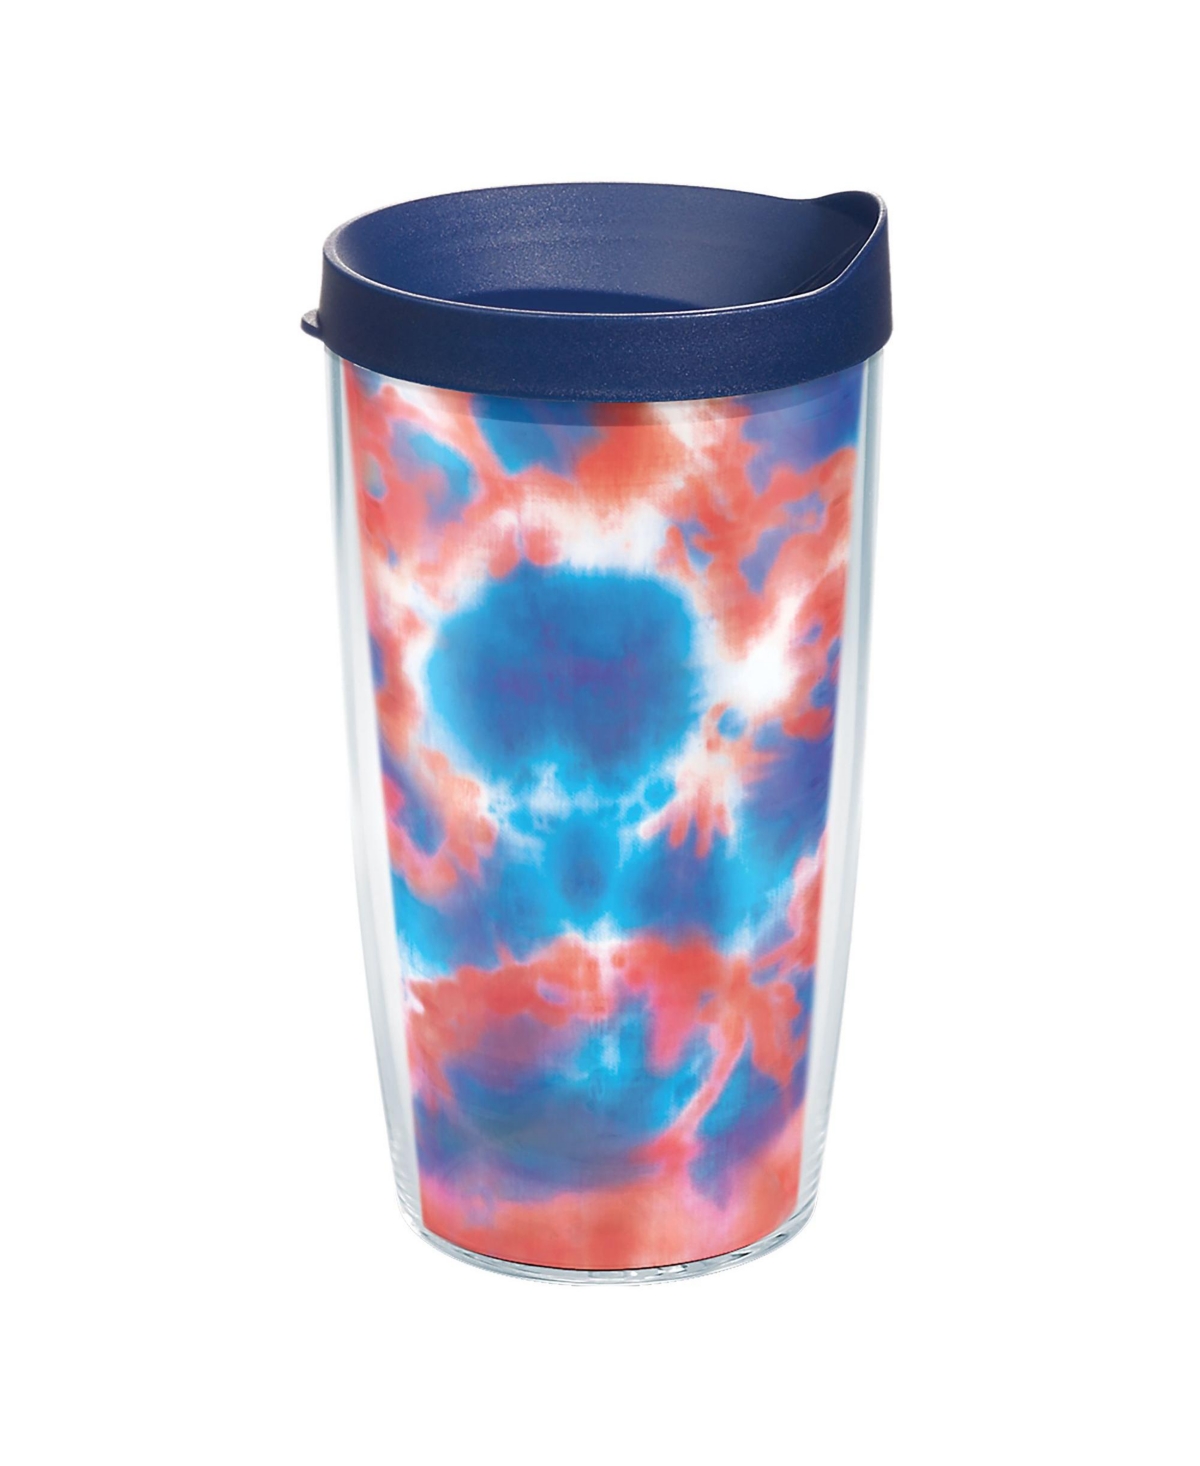 Tervis Tumbler Tervis Americana Tie Dye Made In Usa Double Walled Insulated Tumbler Travel Cup Keeps Drinks Cold & In Open Miscellaneous